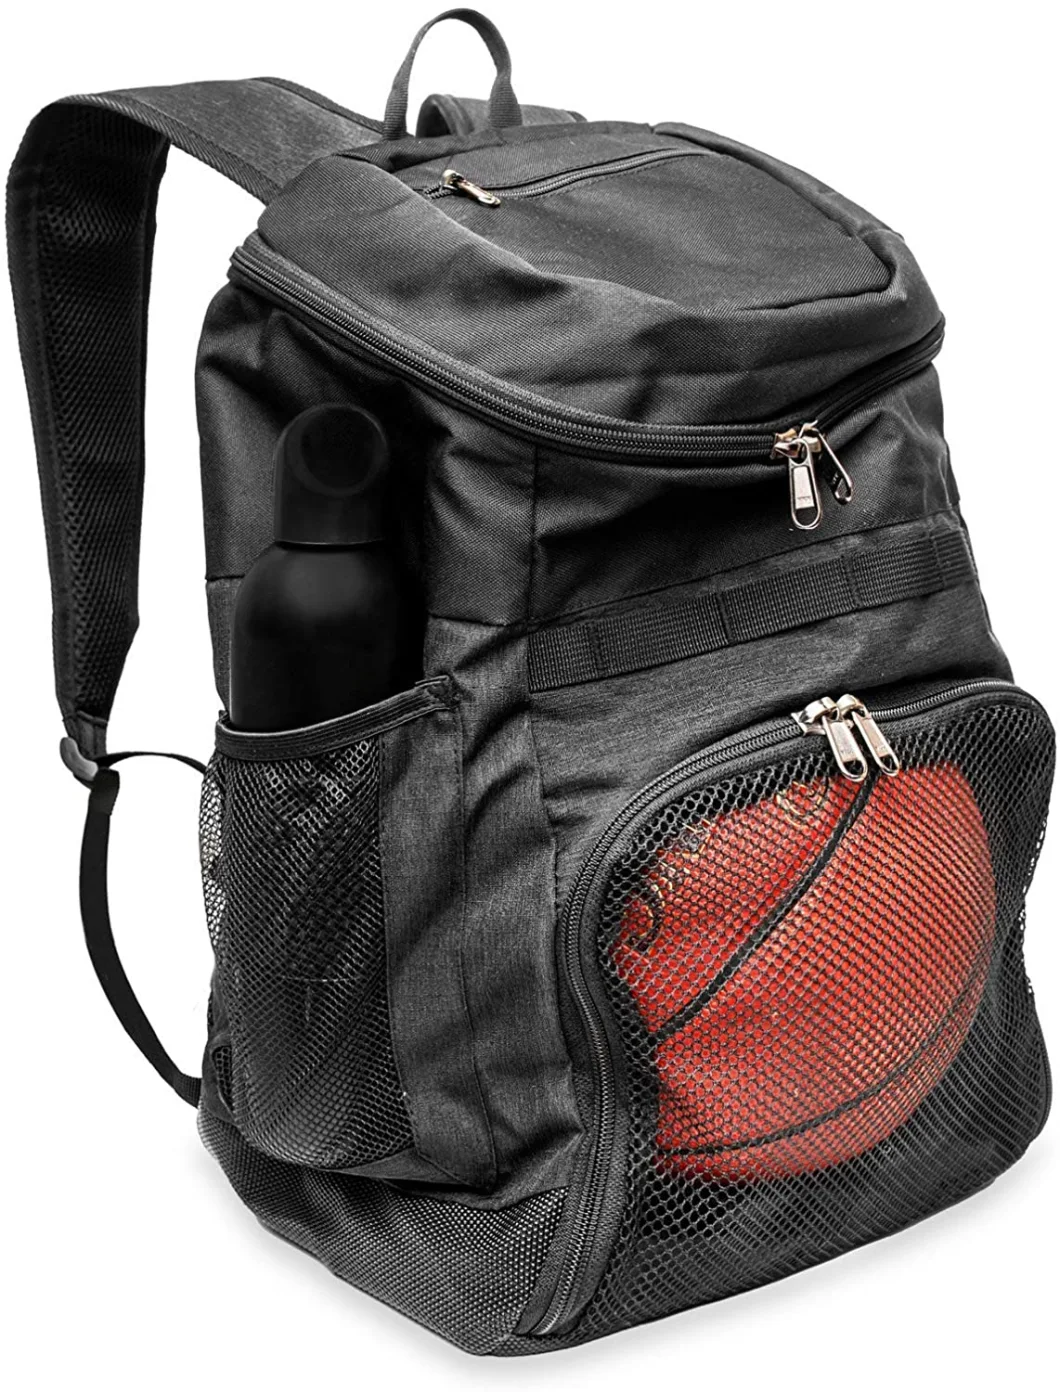 Sports Equipment Bag with Ball Compartment Used in Gym Outdoor Travel School Team